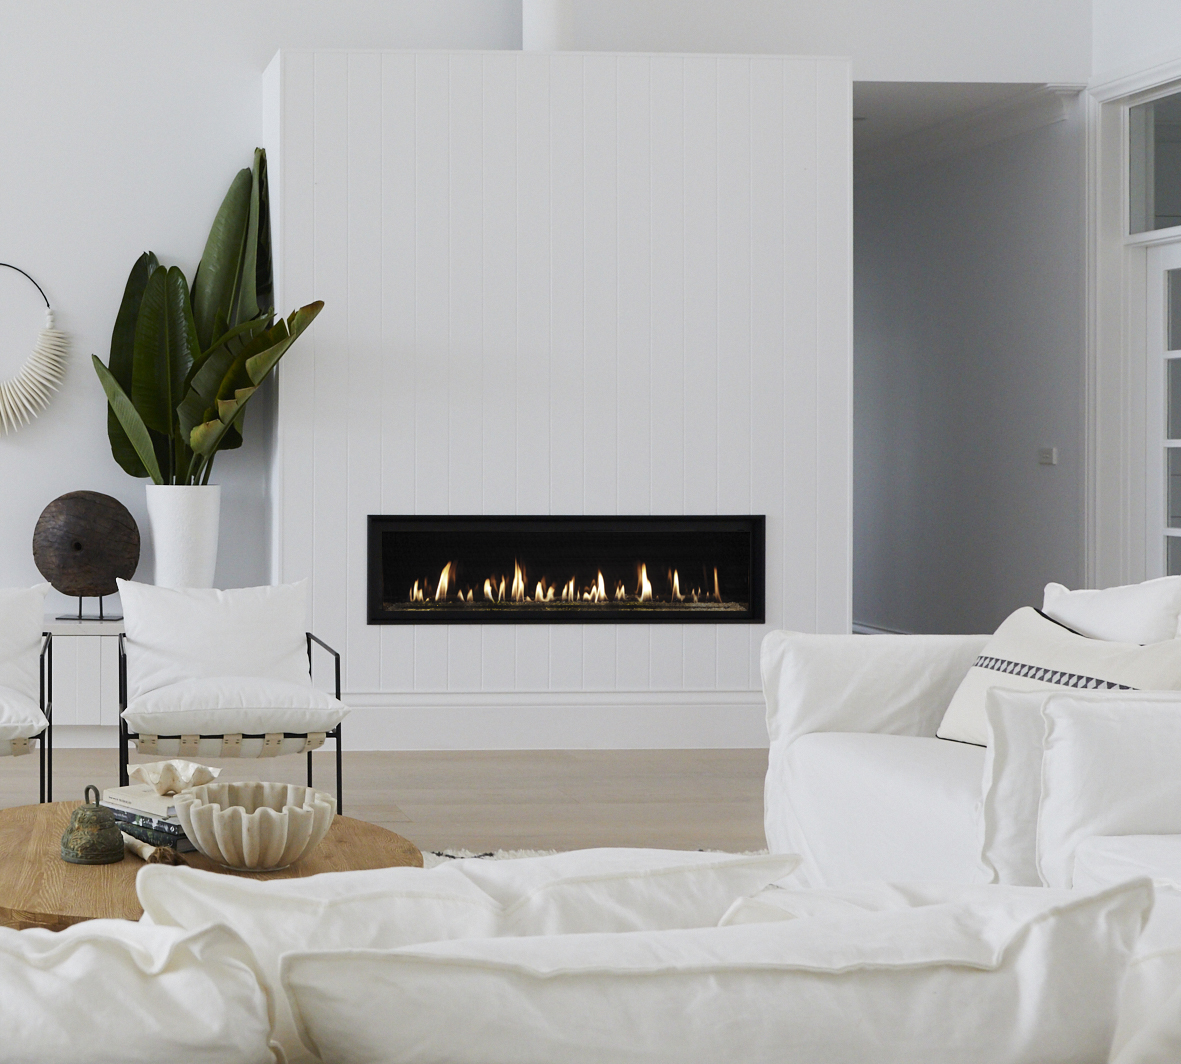 Lopi Gas Inbuilt Fireplaces installed in white living room - Lopi Fireplaces Australia